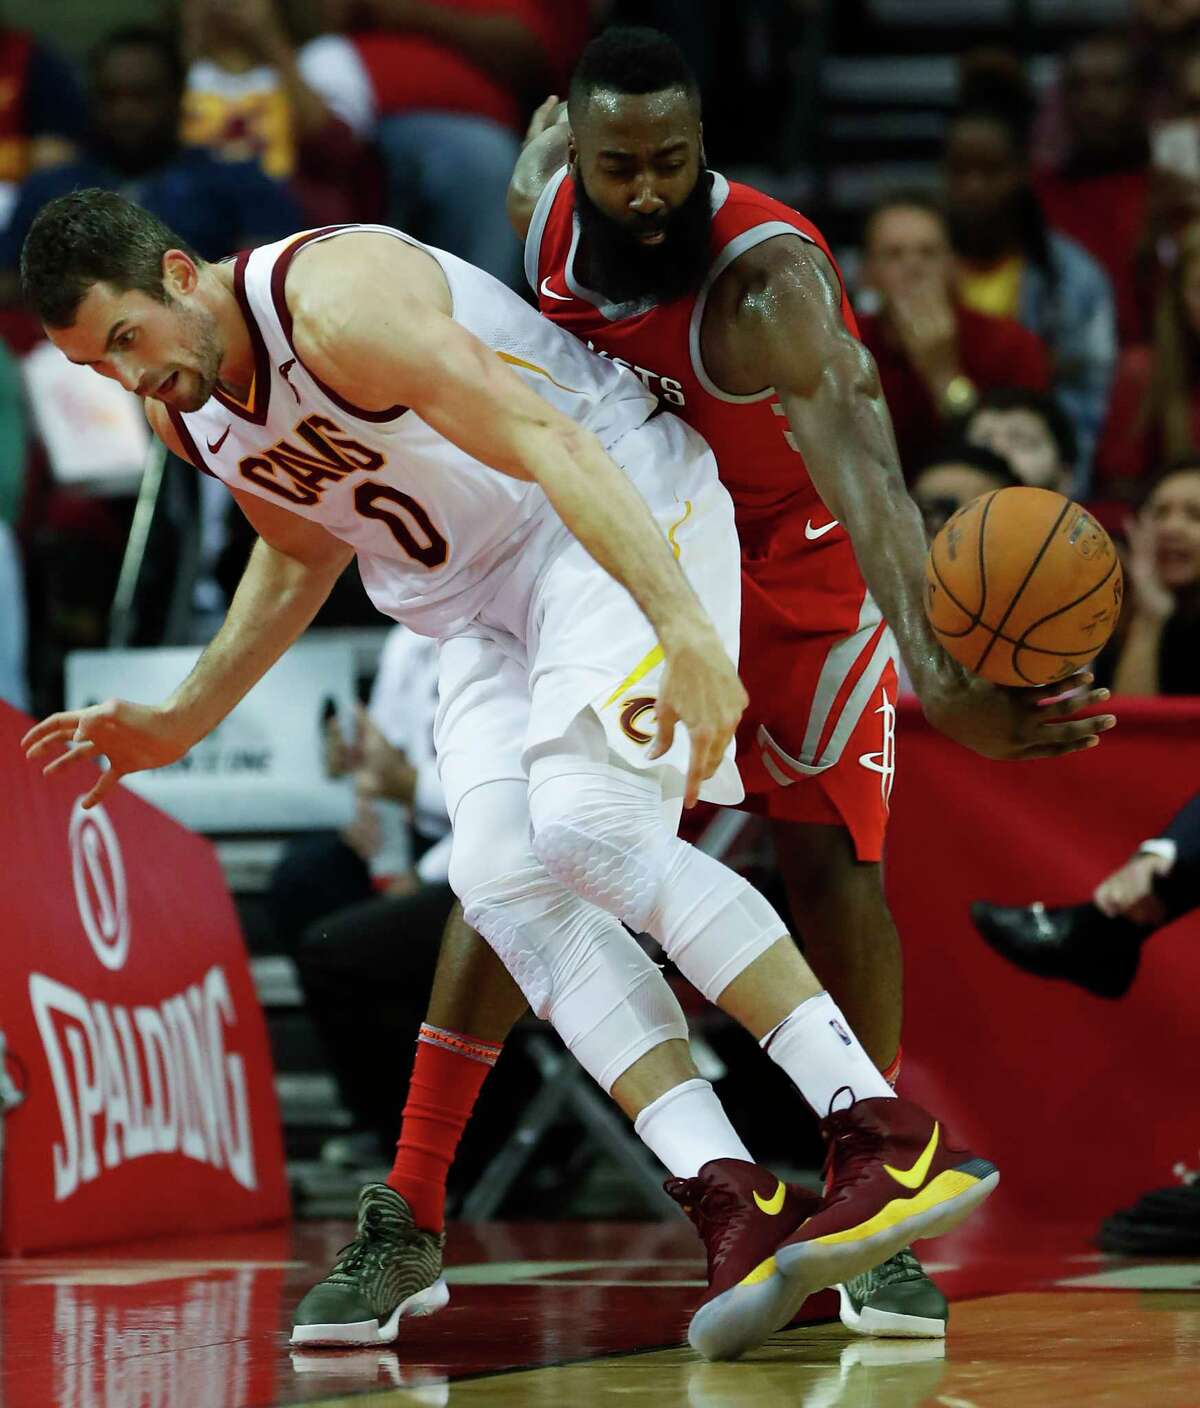 Rockets guard James Harden, right, pulls a surprise attack from behind to steal the ball away from Cavaliers forward Kevin Love during the first half at Toyota Center on Thursday night.